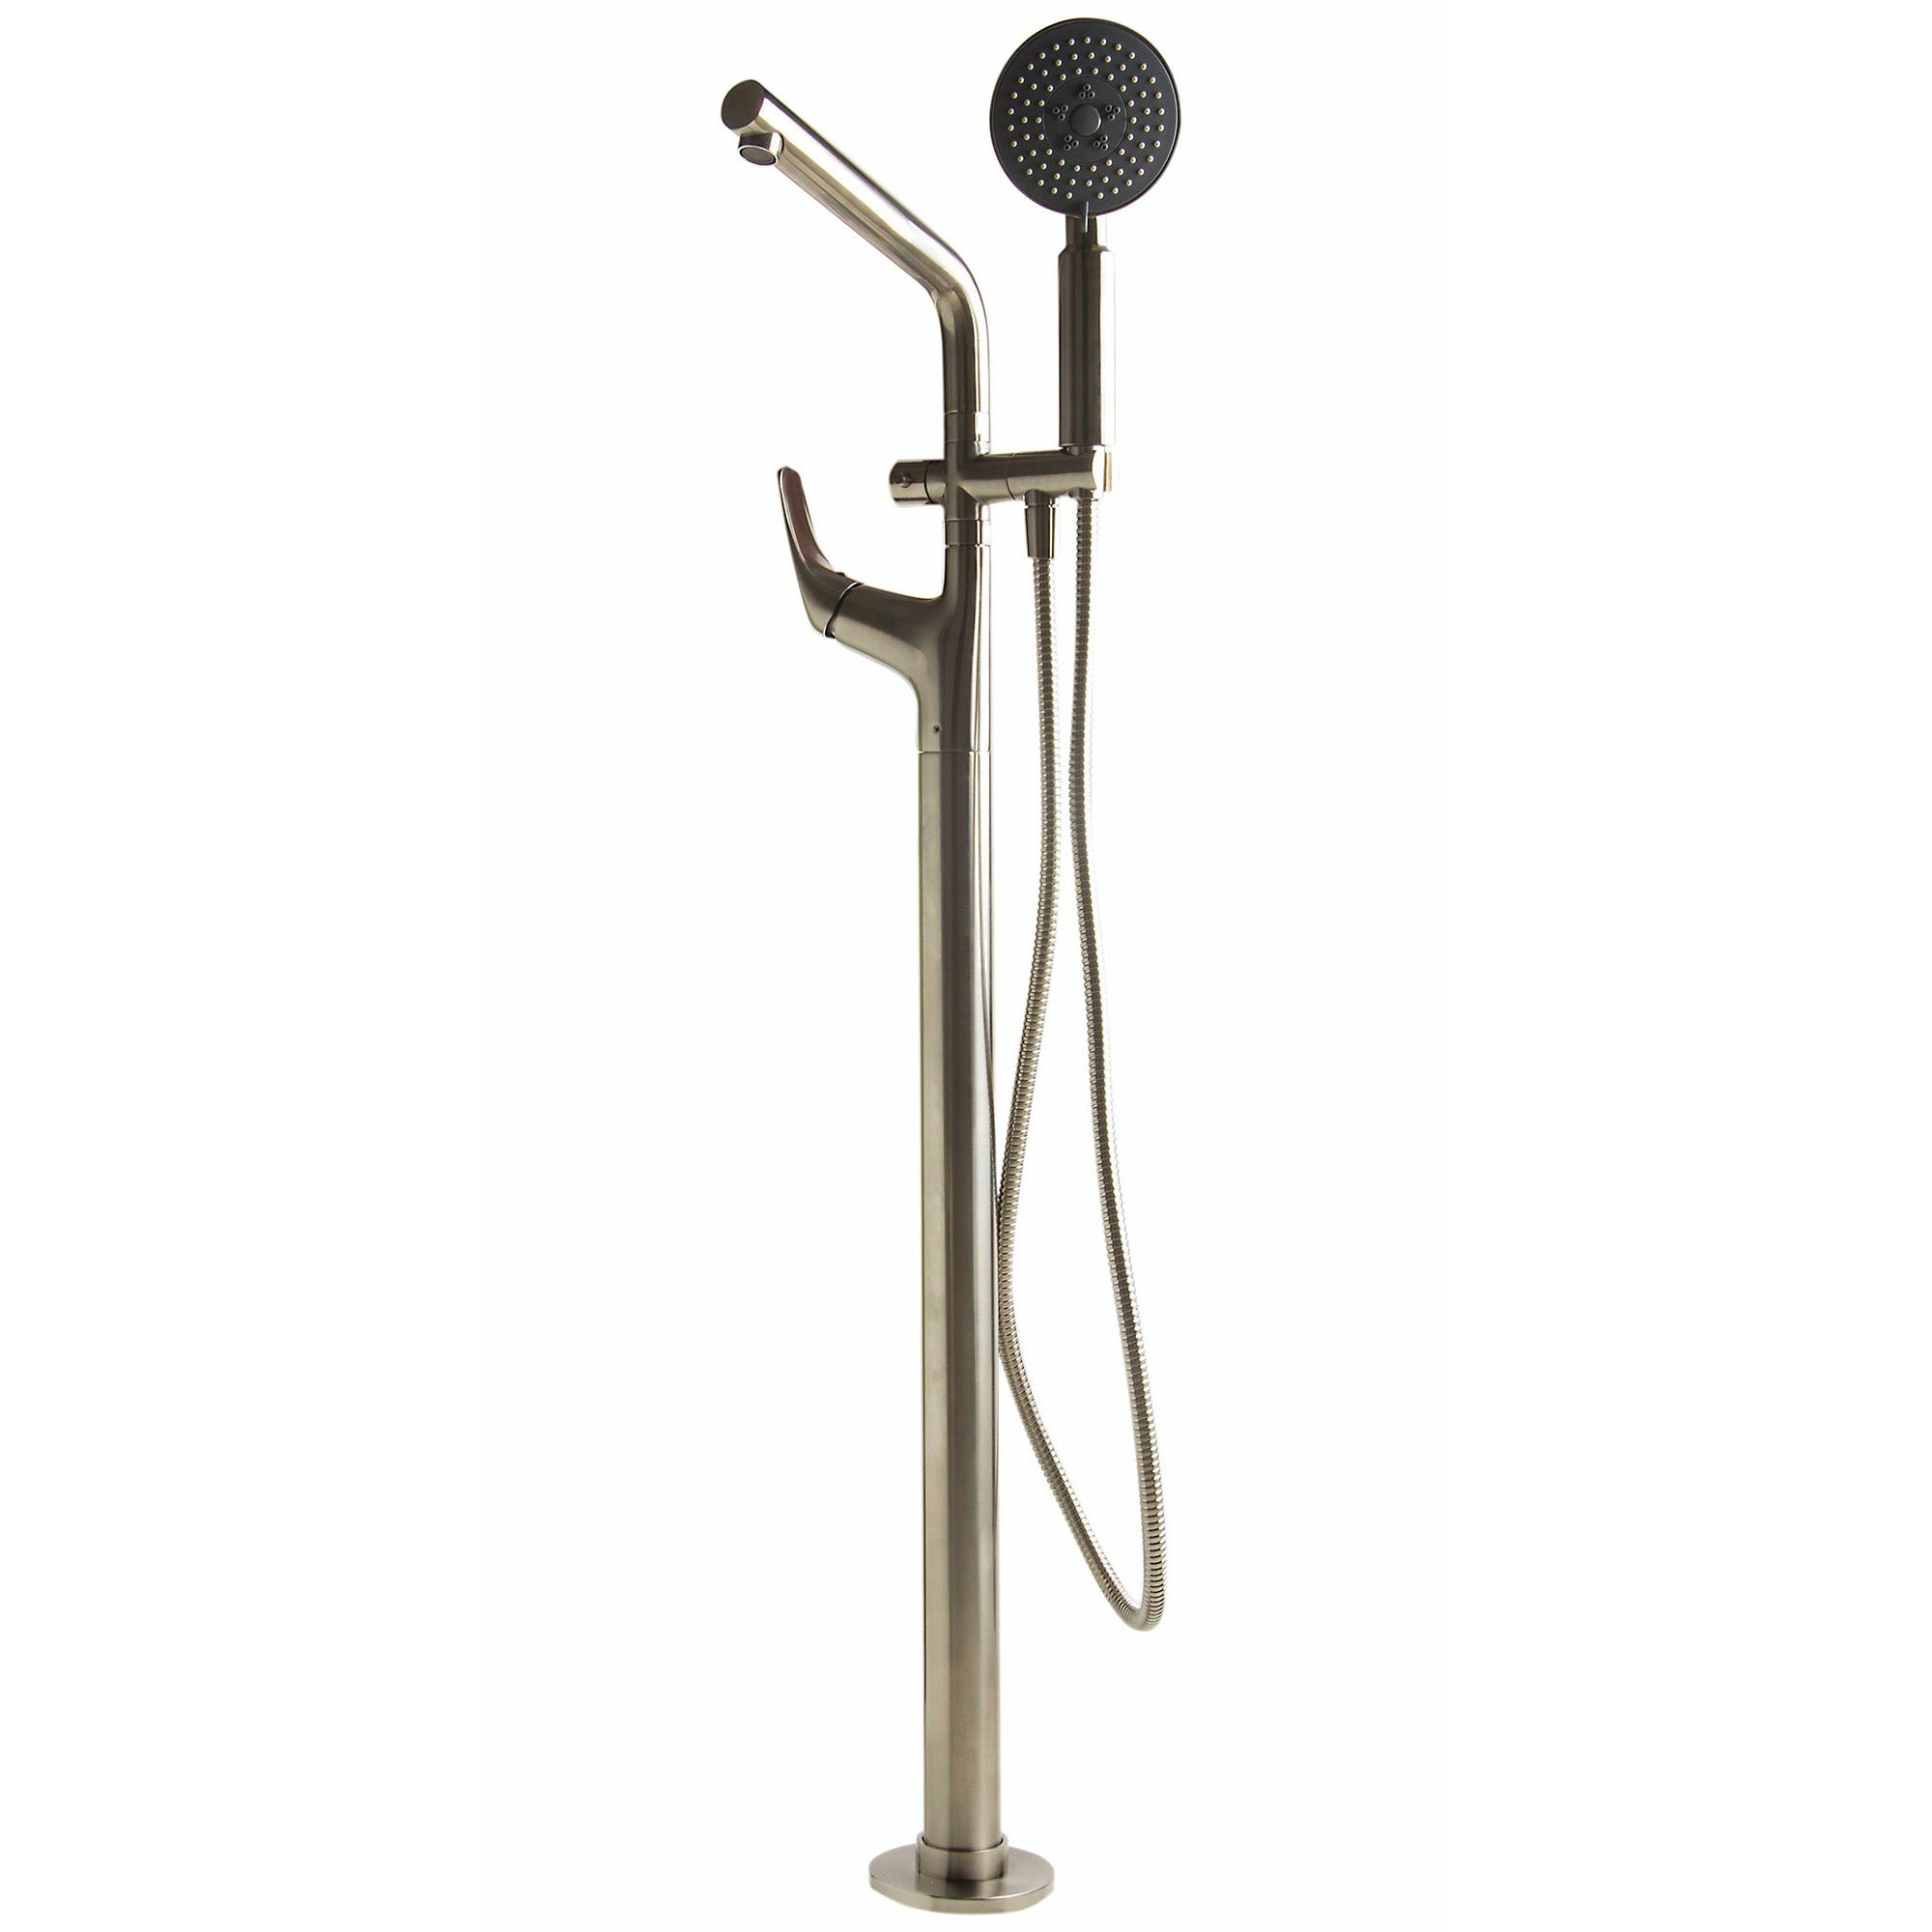 ALFI AB2758 Floor Mounted Tub Filler + Mixer /w additional Hand Held Shower Head brushed nickel in a white background